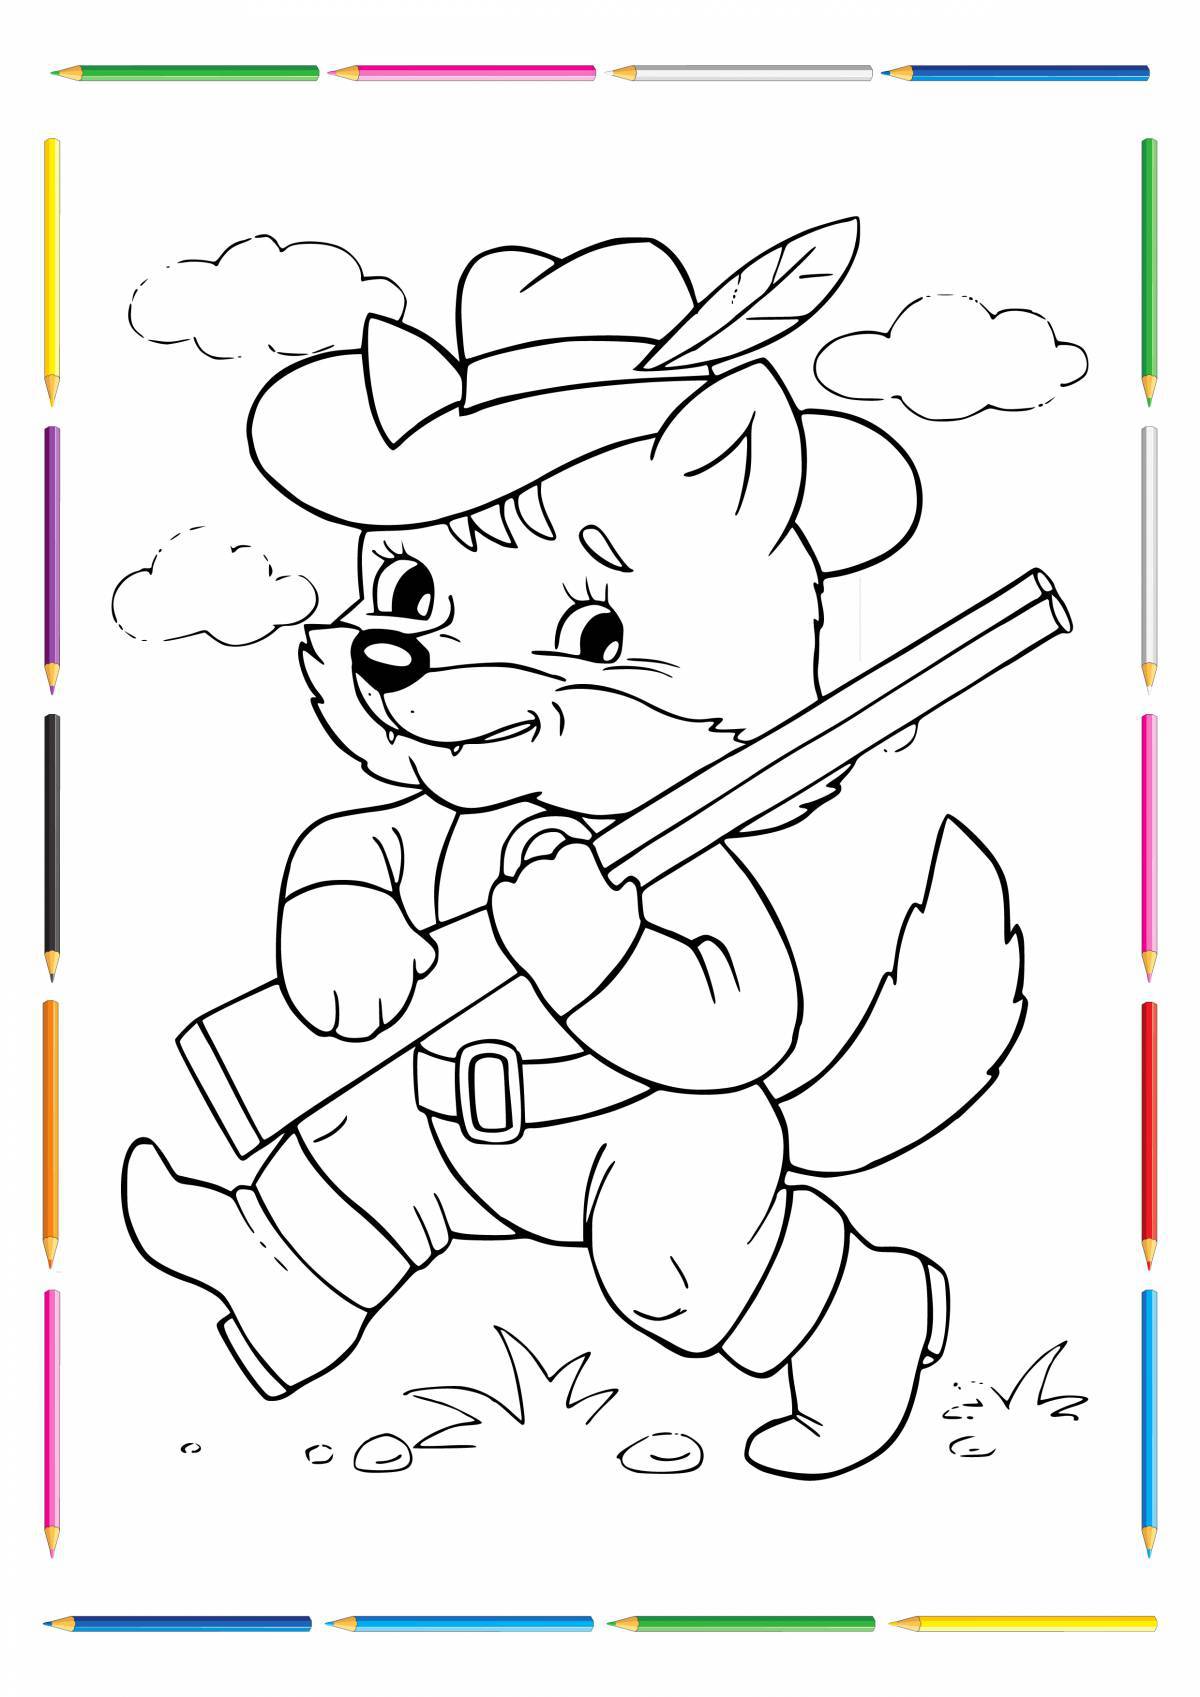 Color-frenzy coloring page for children 6-7 years old